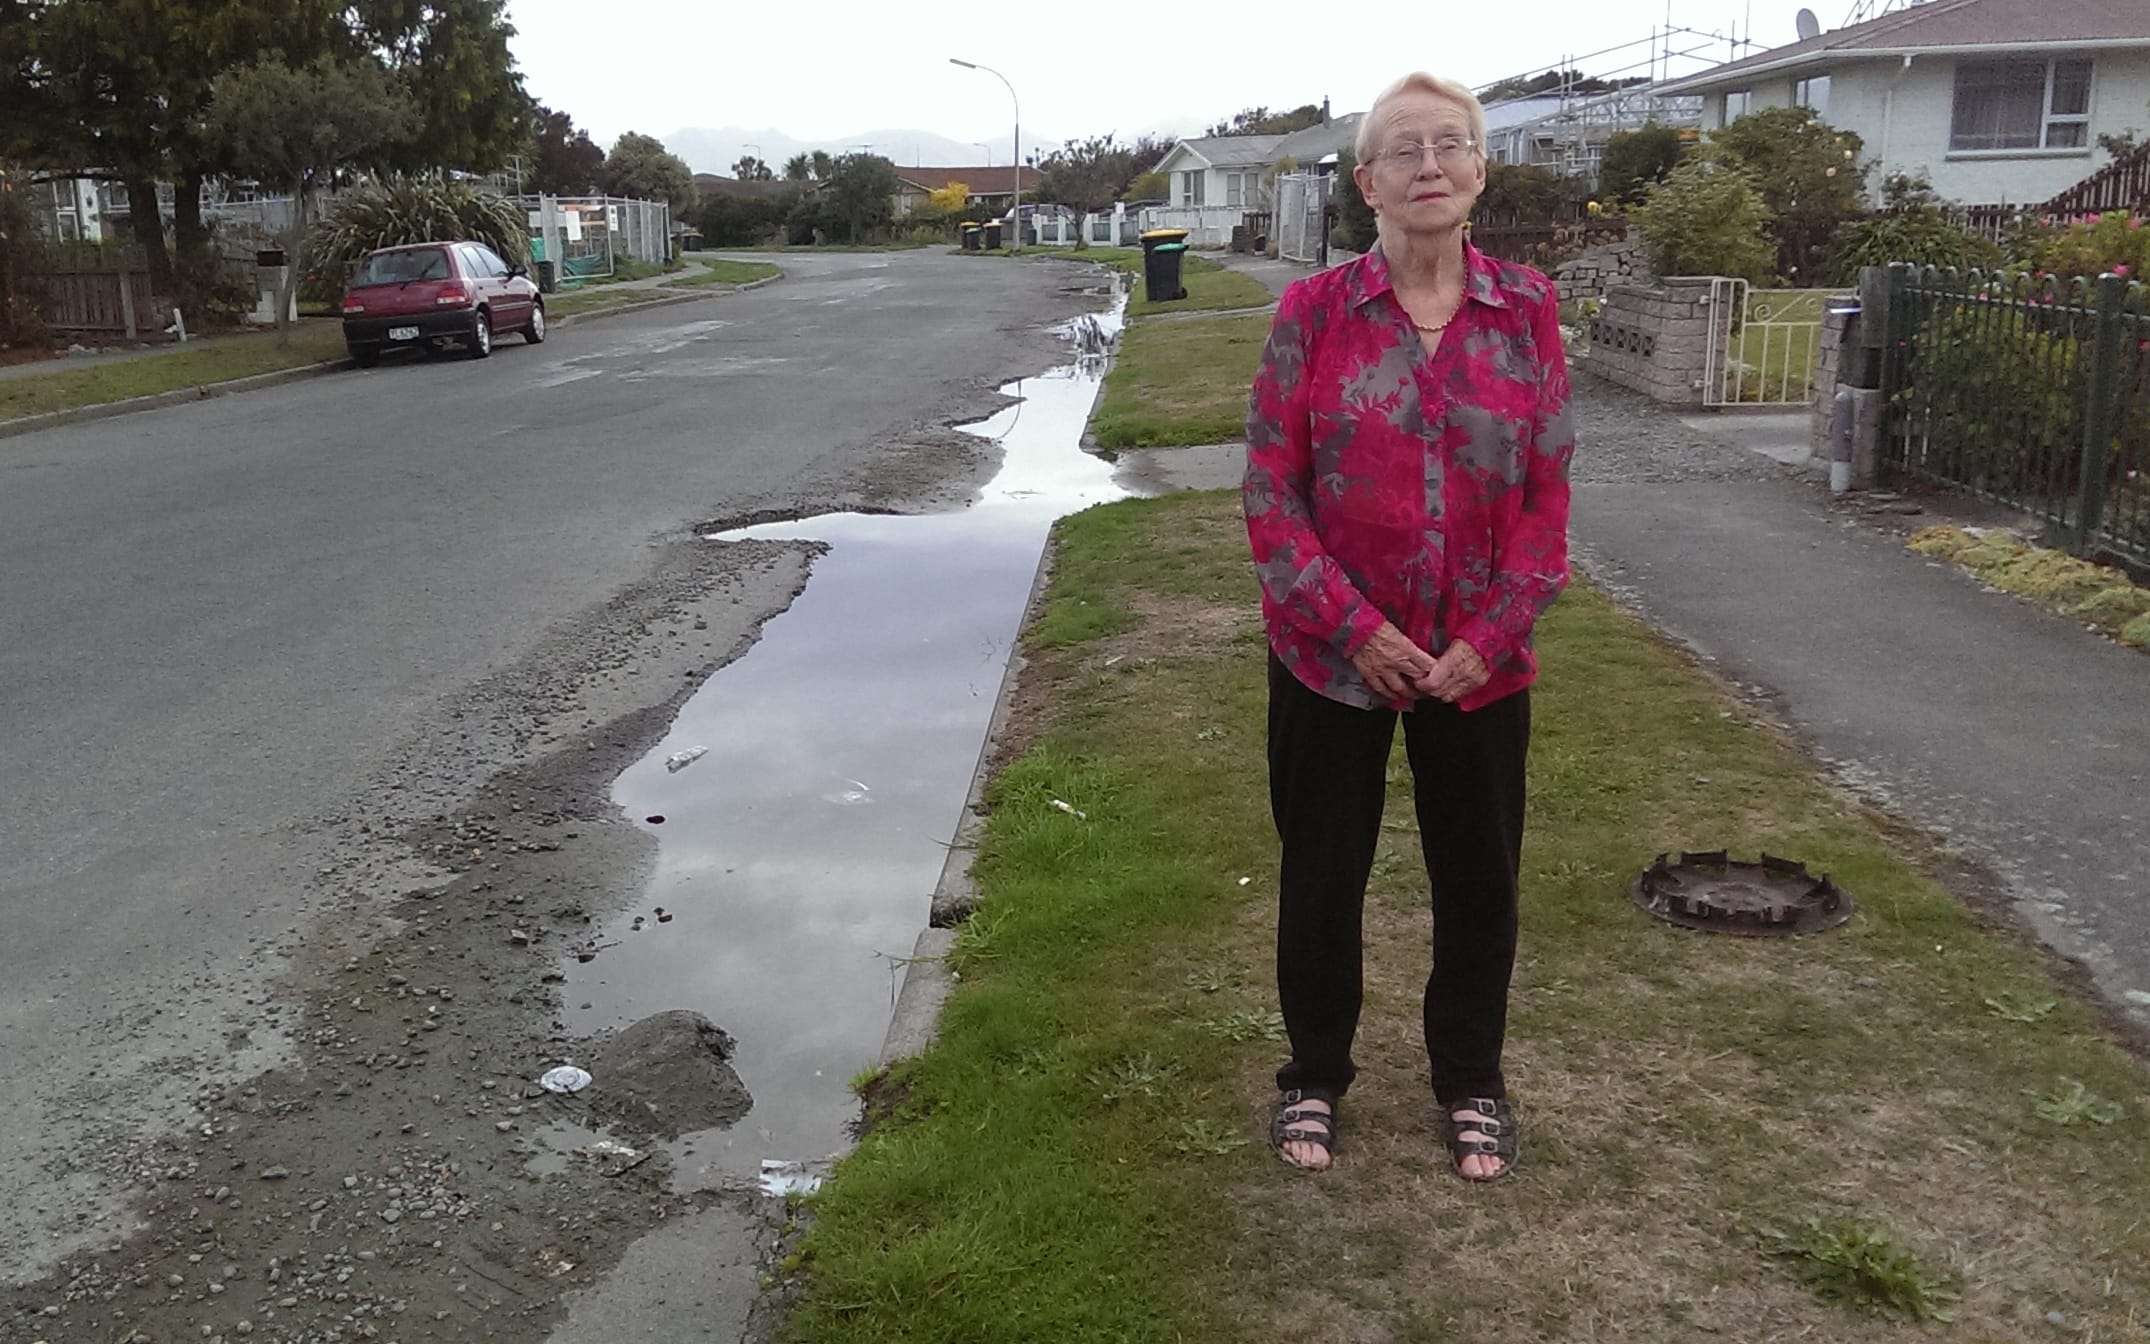 Joyce Fuller's street has had a constant flood of water ever since a spring came up in a neighbour's property in the earthquakes four years ago.